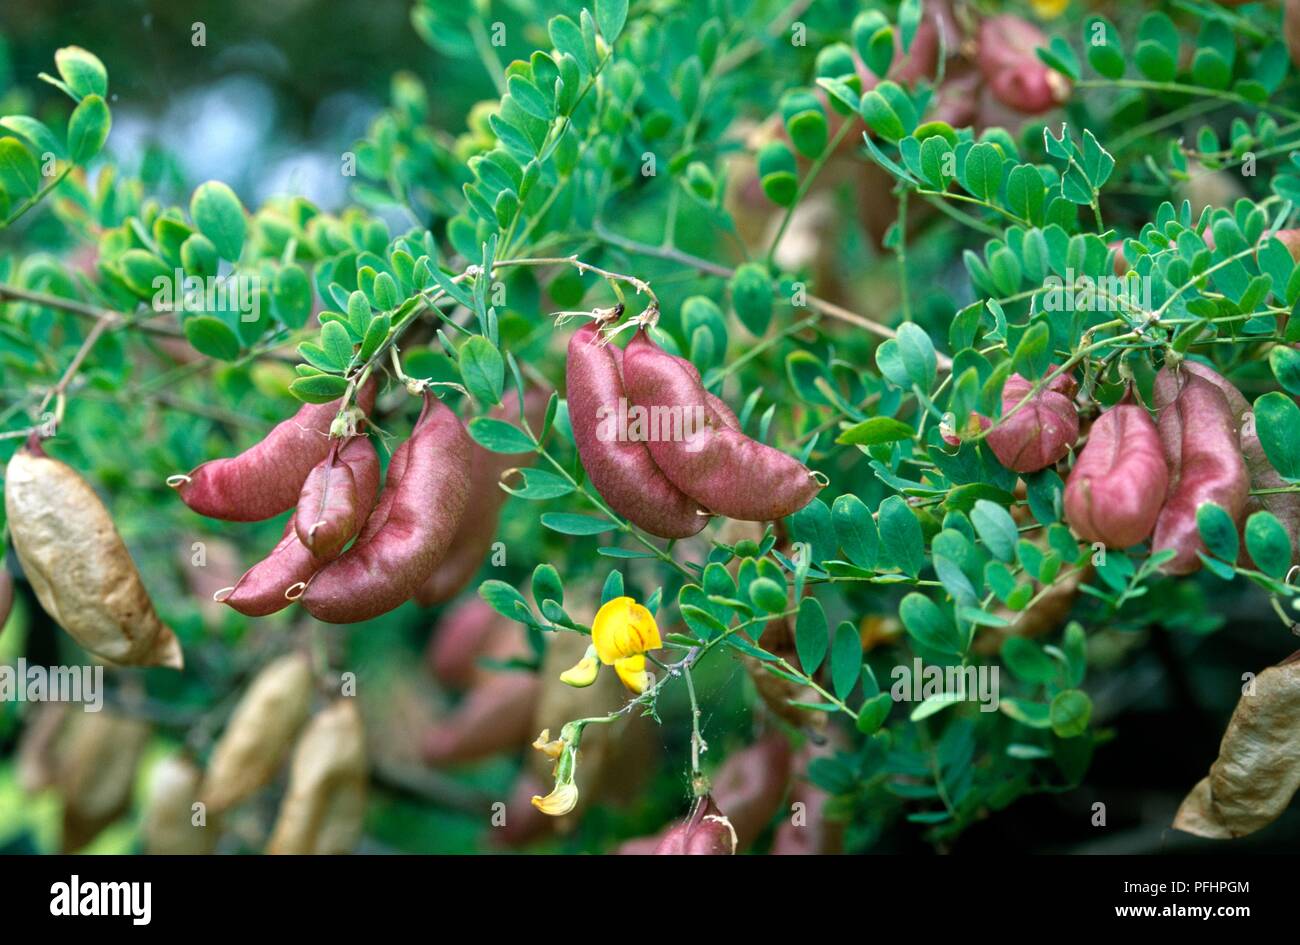 Colutea arborescens (Bladder senna), shrub with red seed pods and green leaves Stock Photo